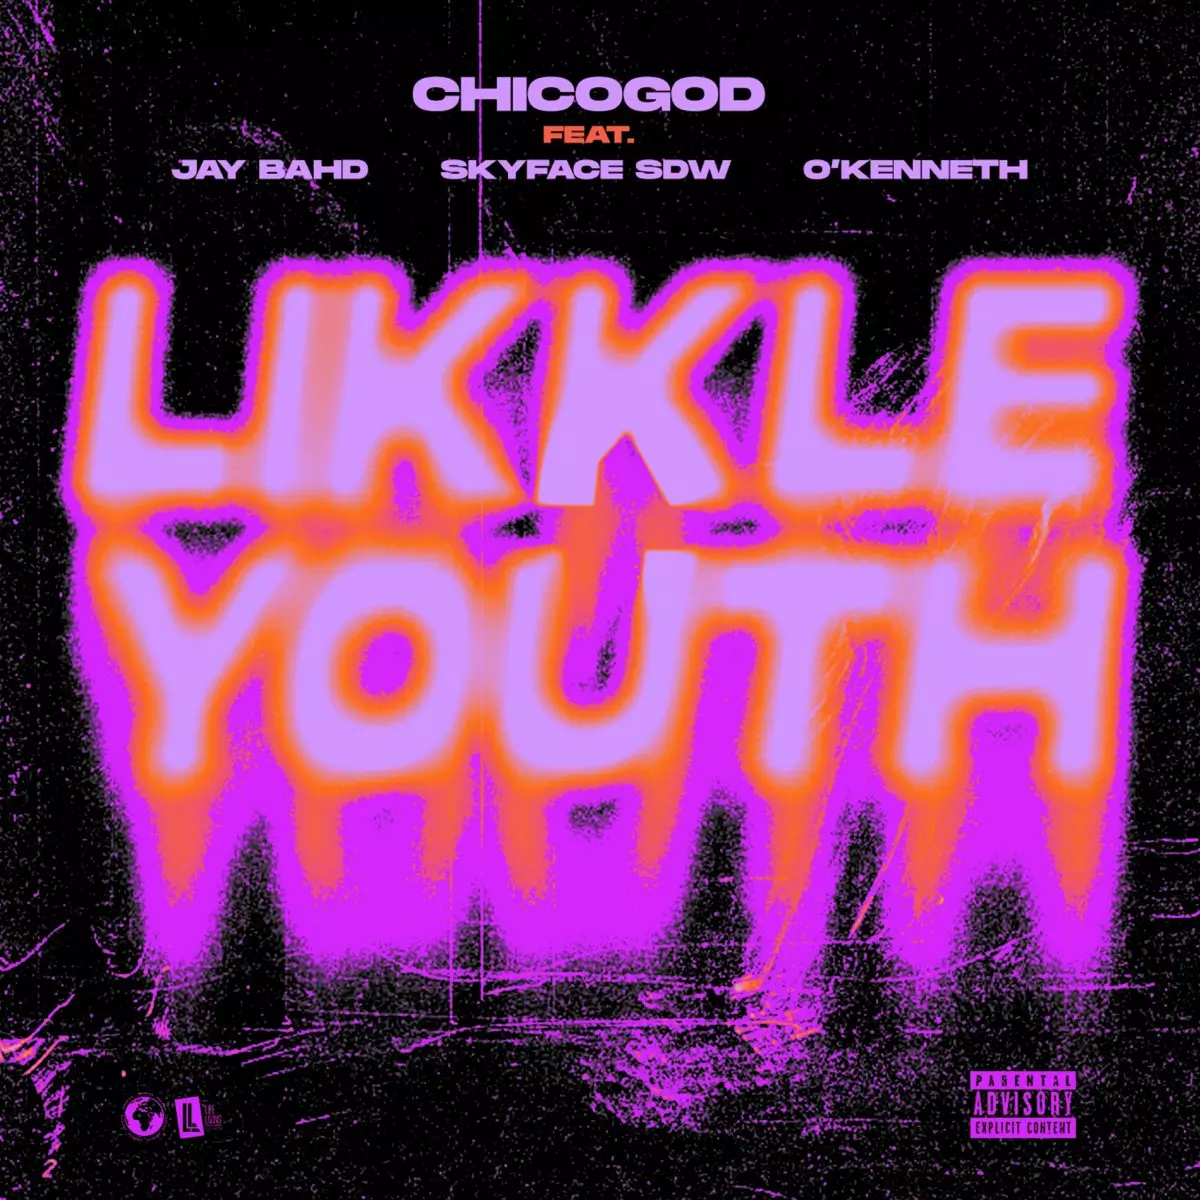 Likkle Youth (feat. Jay Bahd, Skyface SDW and O'Kenneth) - Single by CHICOGOD on Apple Music